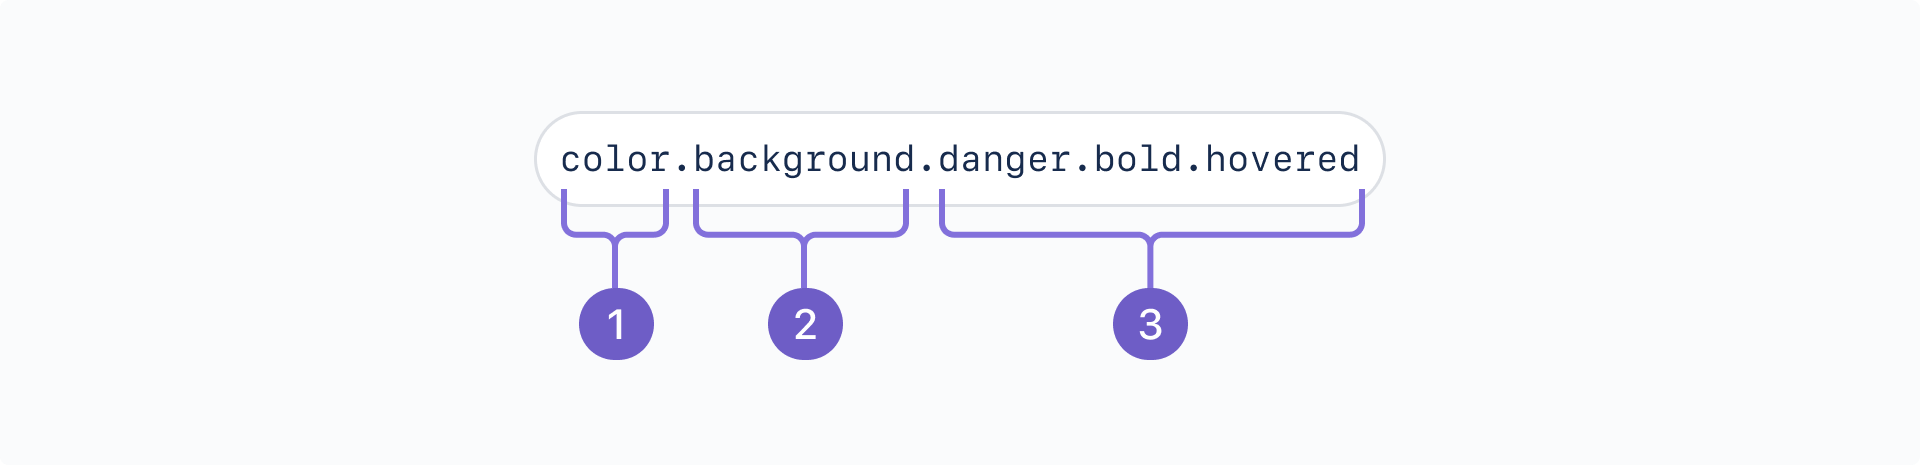 A diagram of a design token called "color.background.danger.bold.hovered." The token is split into three parts, which are numbered as follows: 1. color (the foundation) 2. background (the property) and 3. danger.bold.hovered (the modifier). 